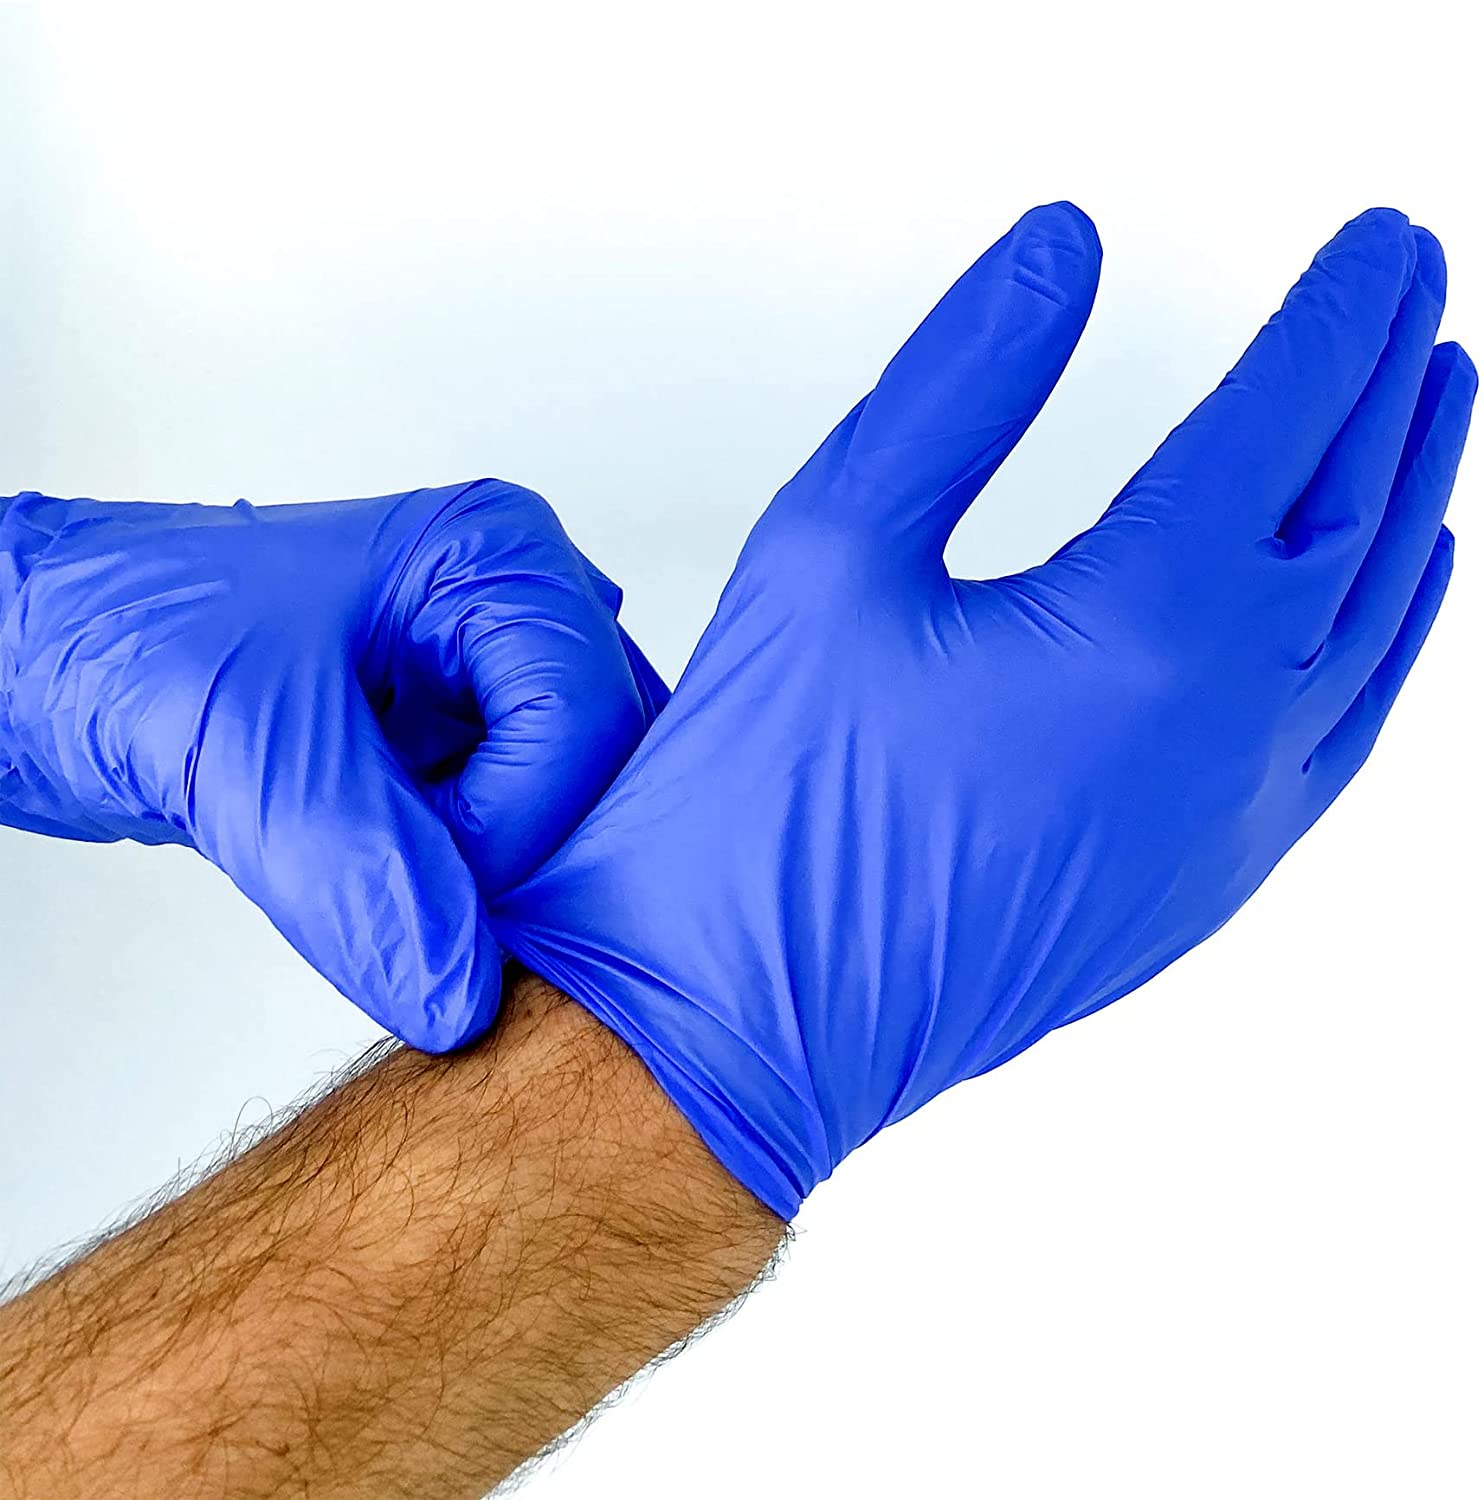 Determination of Nitrile Gloves Appropriate for Use When Dry Handling Art